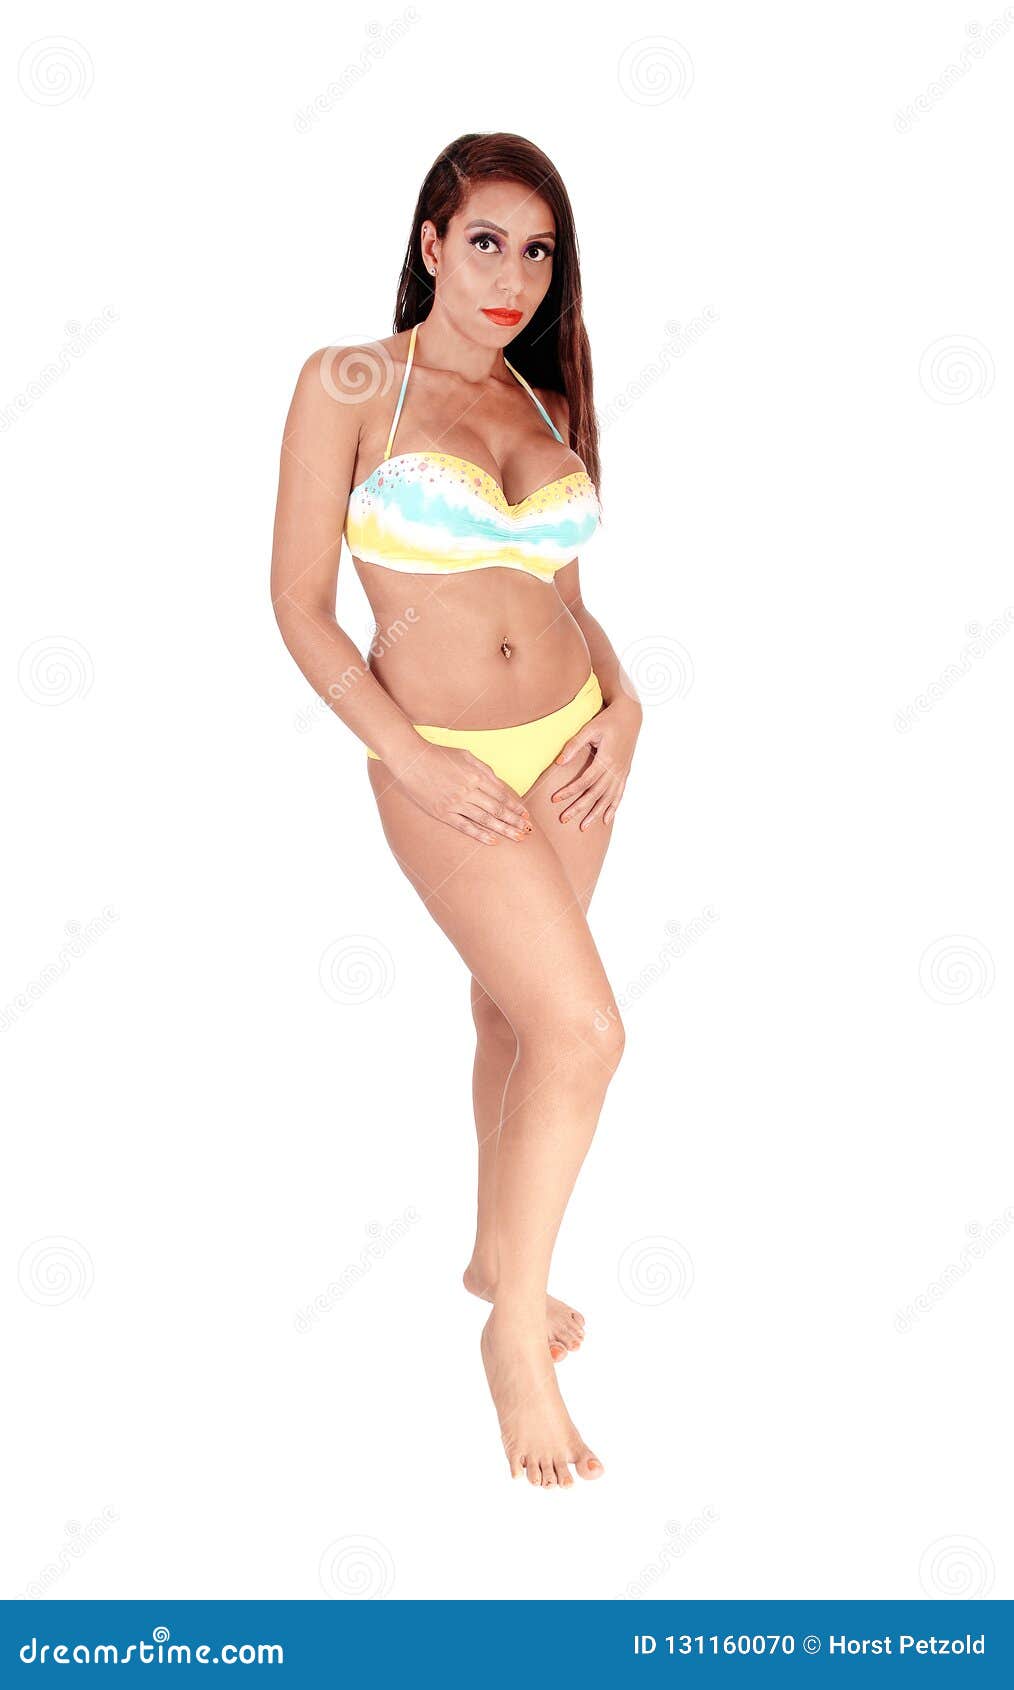 https://thumbs.dreamstime.com/z/beautiful-woman-standing-bikini-front-gorgeous-young-slim-yellow-her-hands-legs-big-breasts-isolated-131160070.jpg